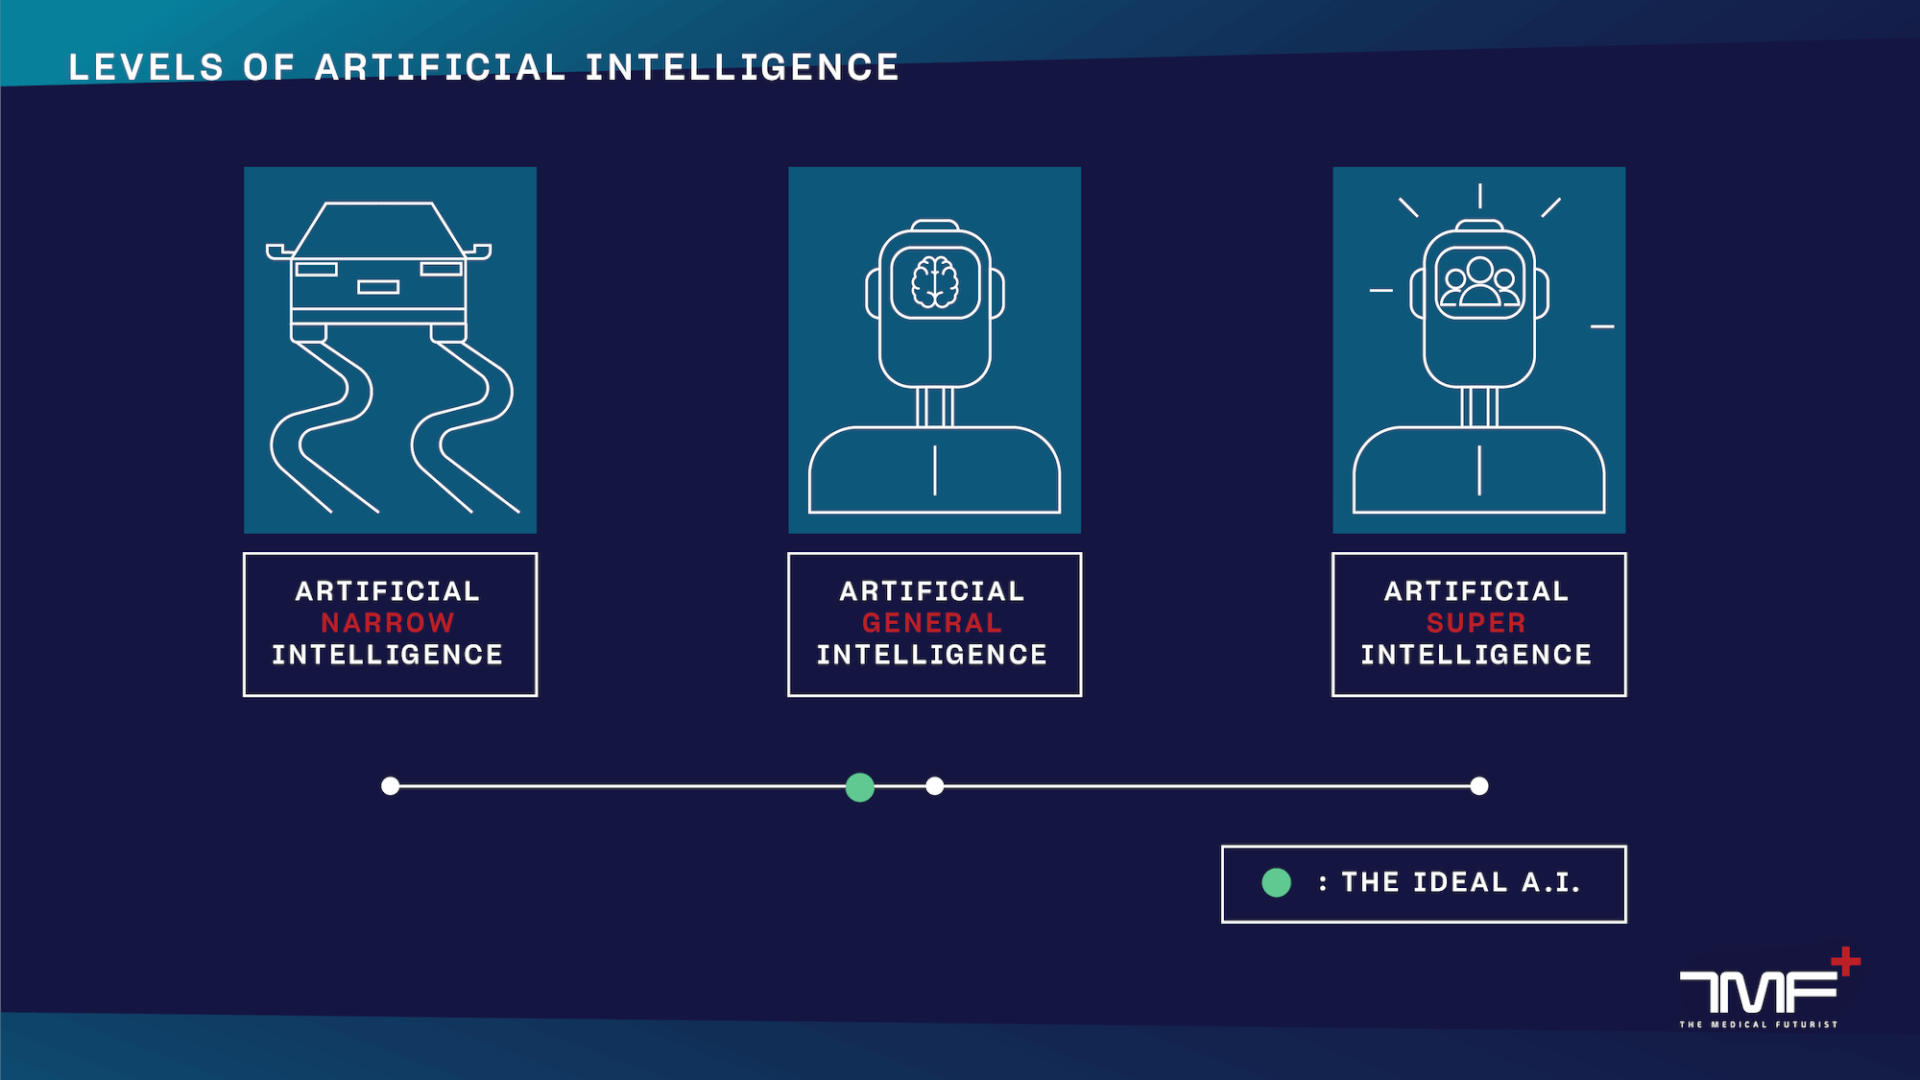 A Physician’s Visual Guide To Artificial Intelligence - The Medical Futurist